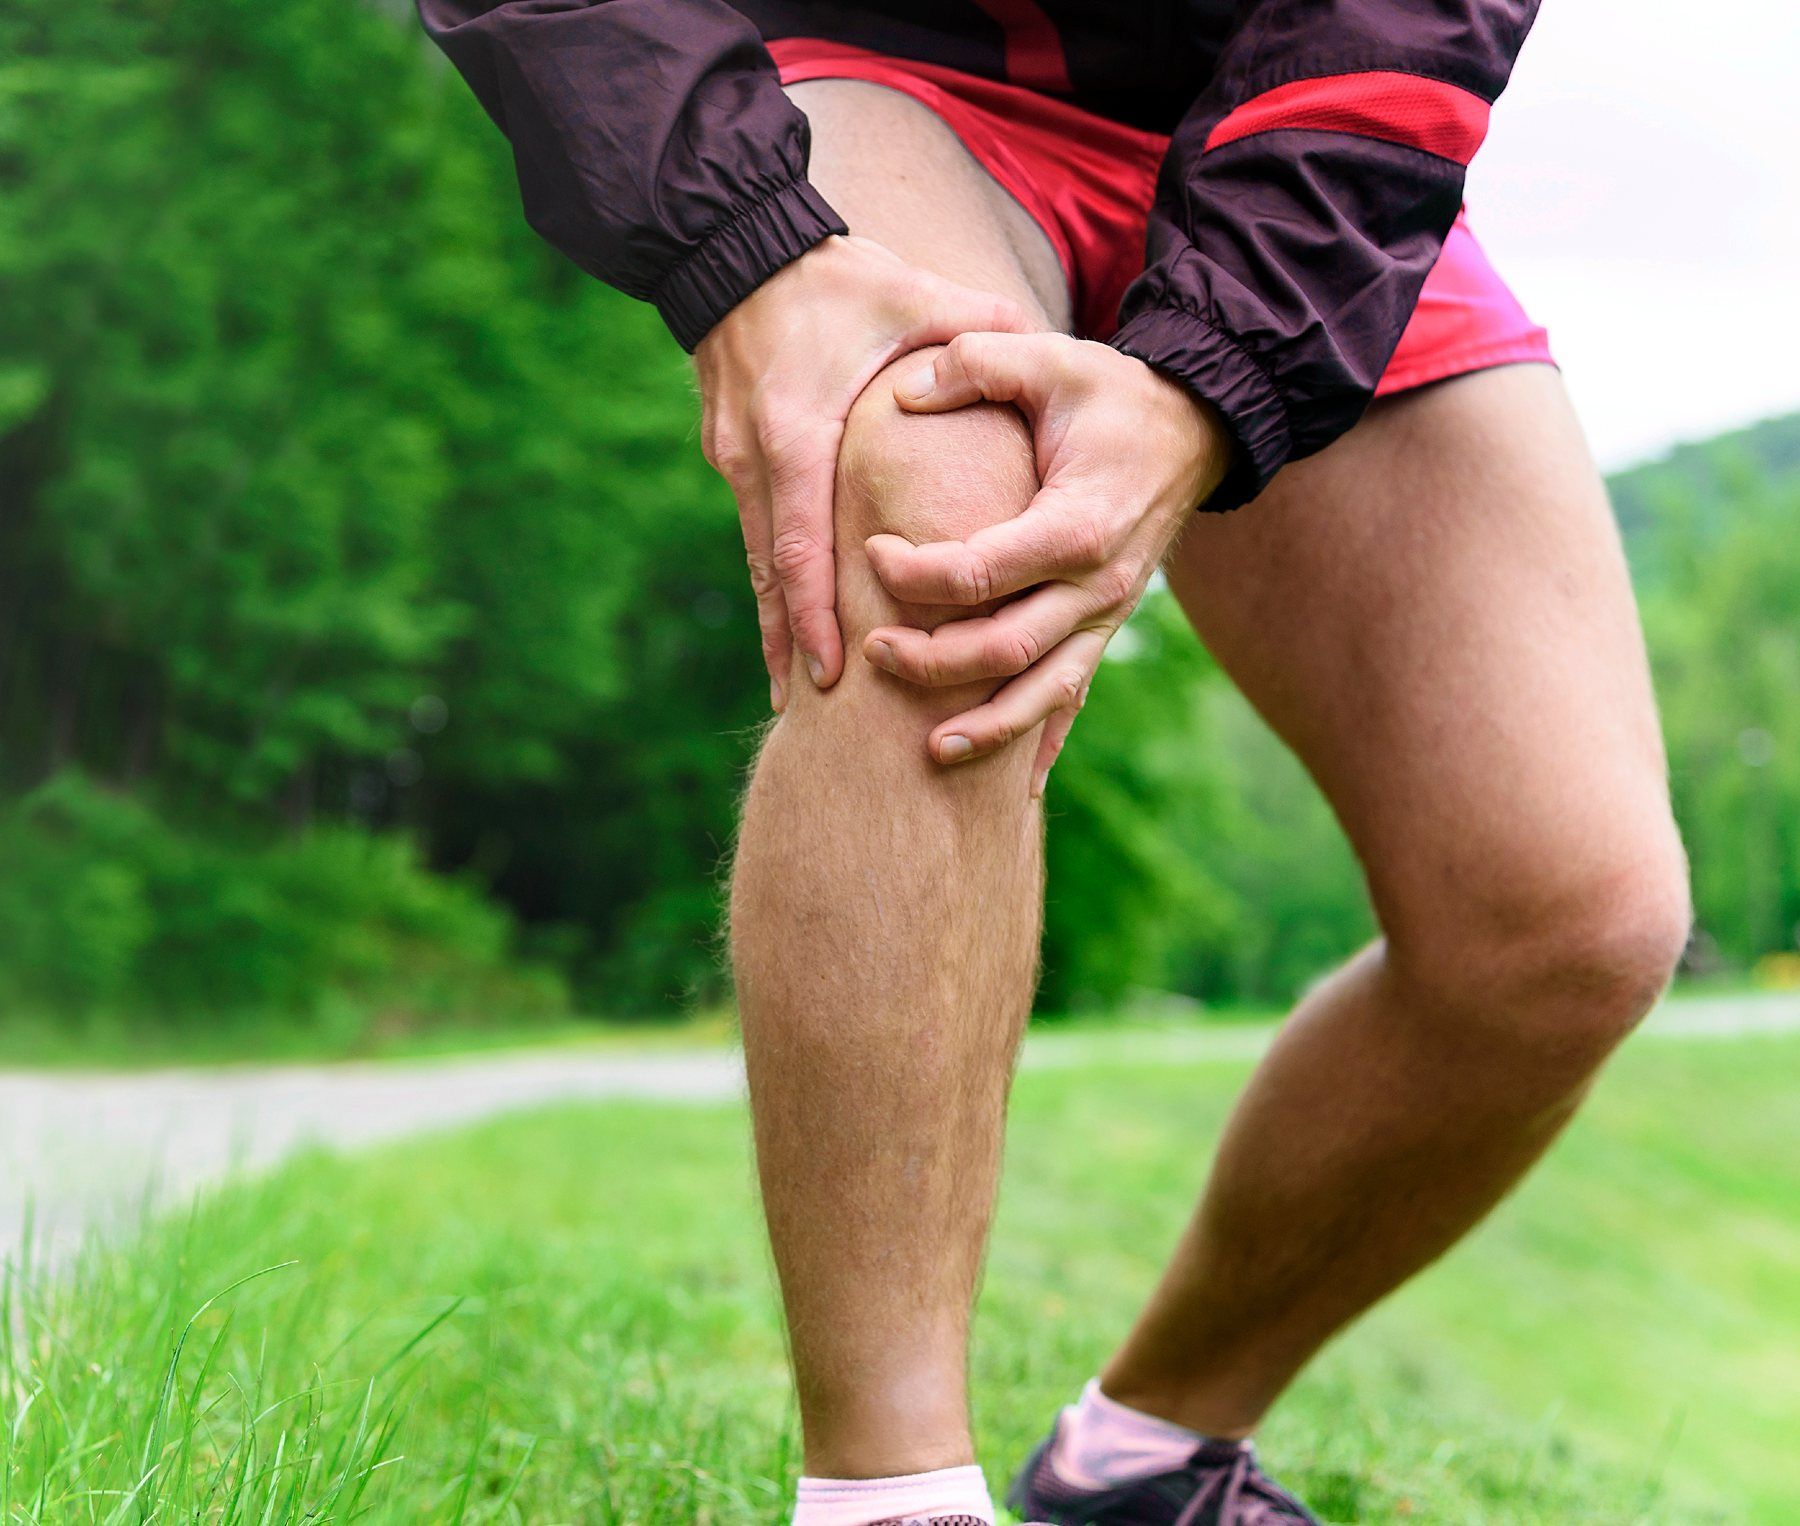 A runner grabs his knee in pain as he stands in the grass - spring valley glucosamine